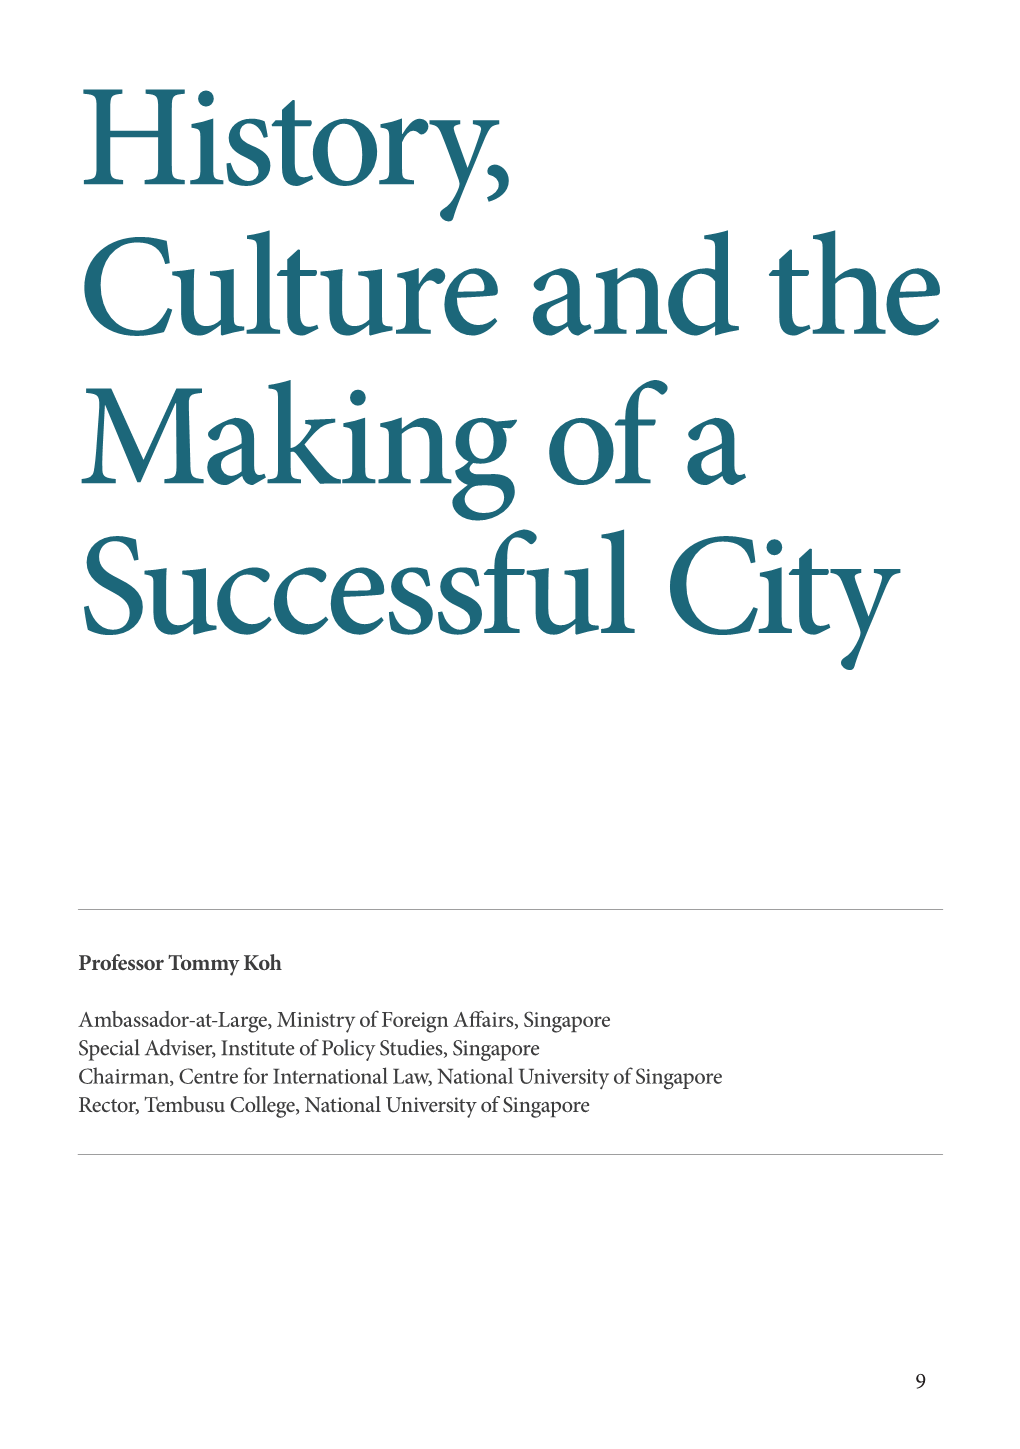 History, Culture and the Making of a Successful City